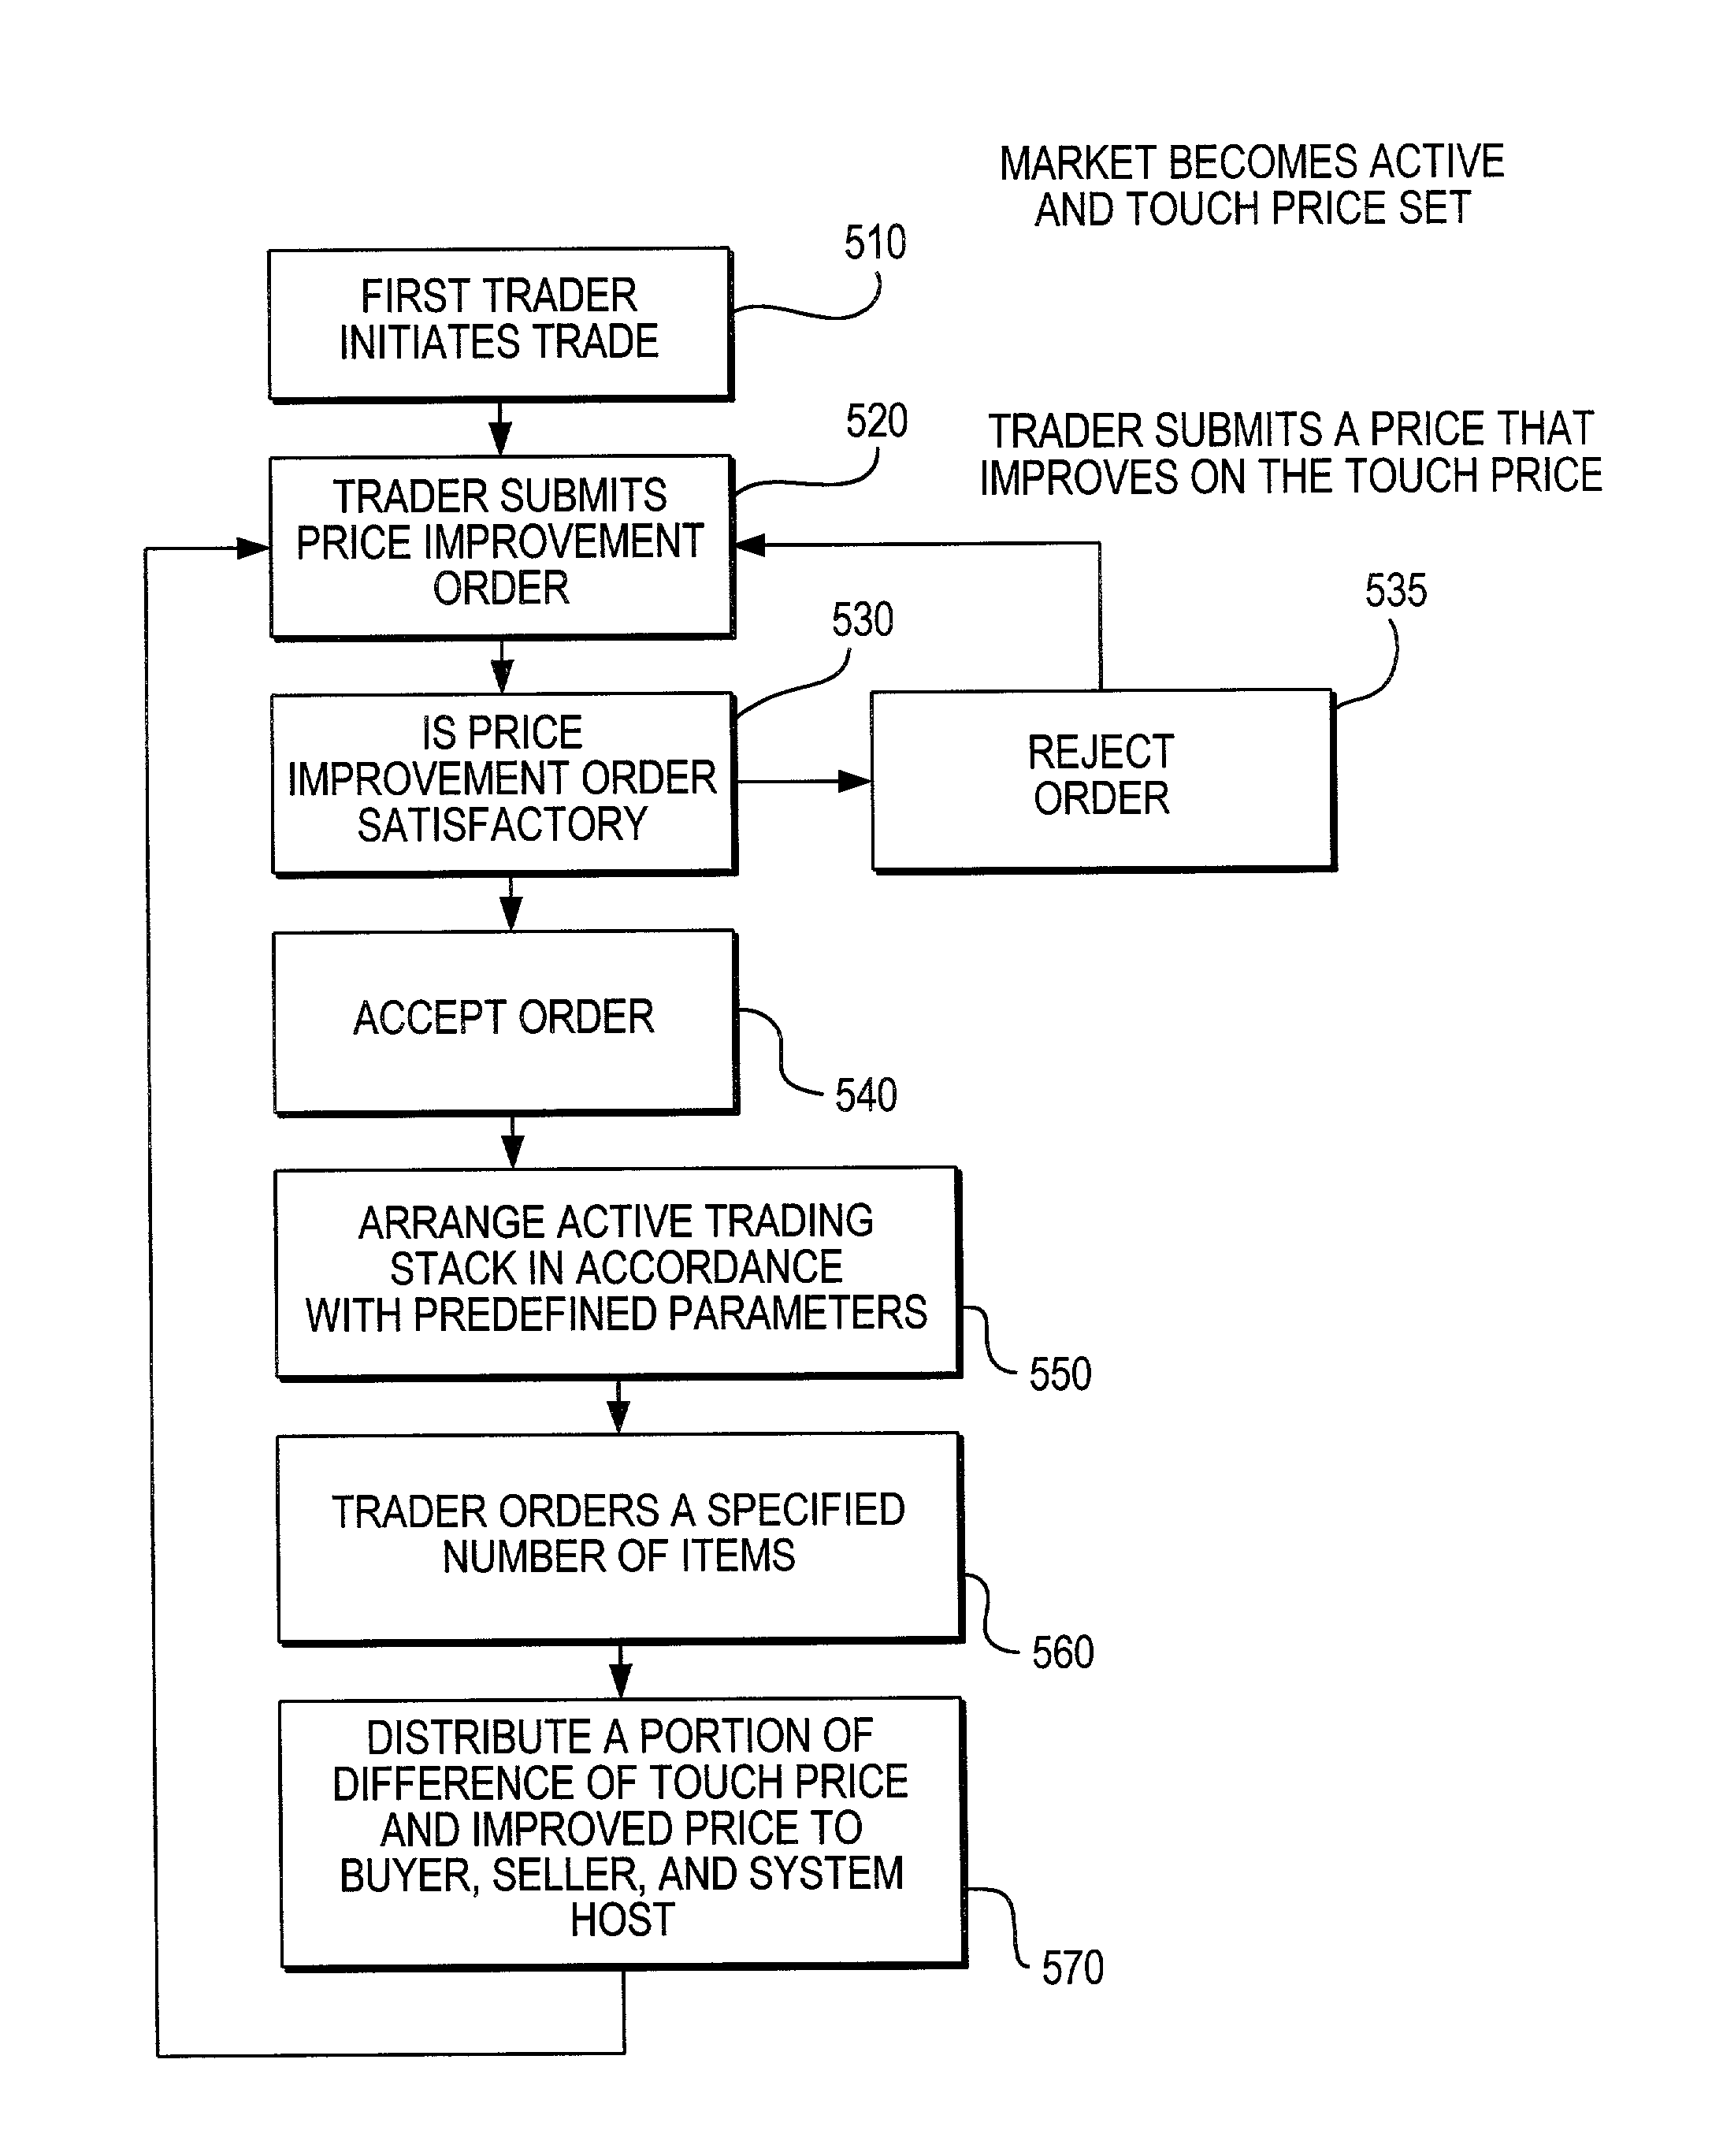 Systems and methods for providing price improvement in an active trading market